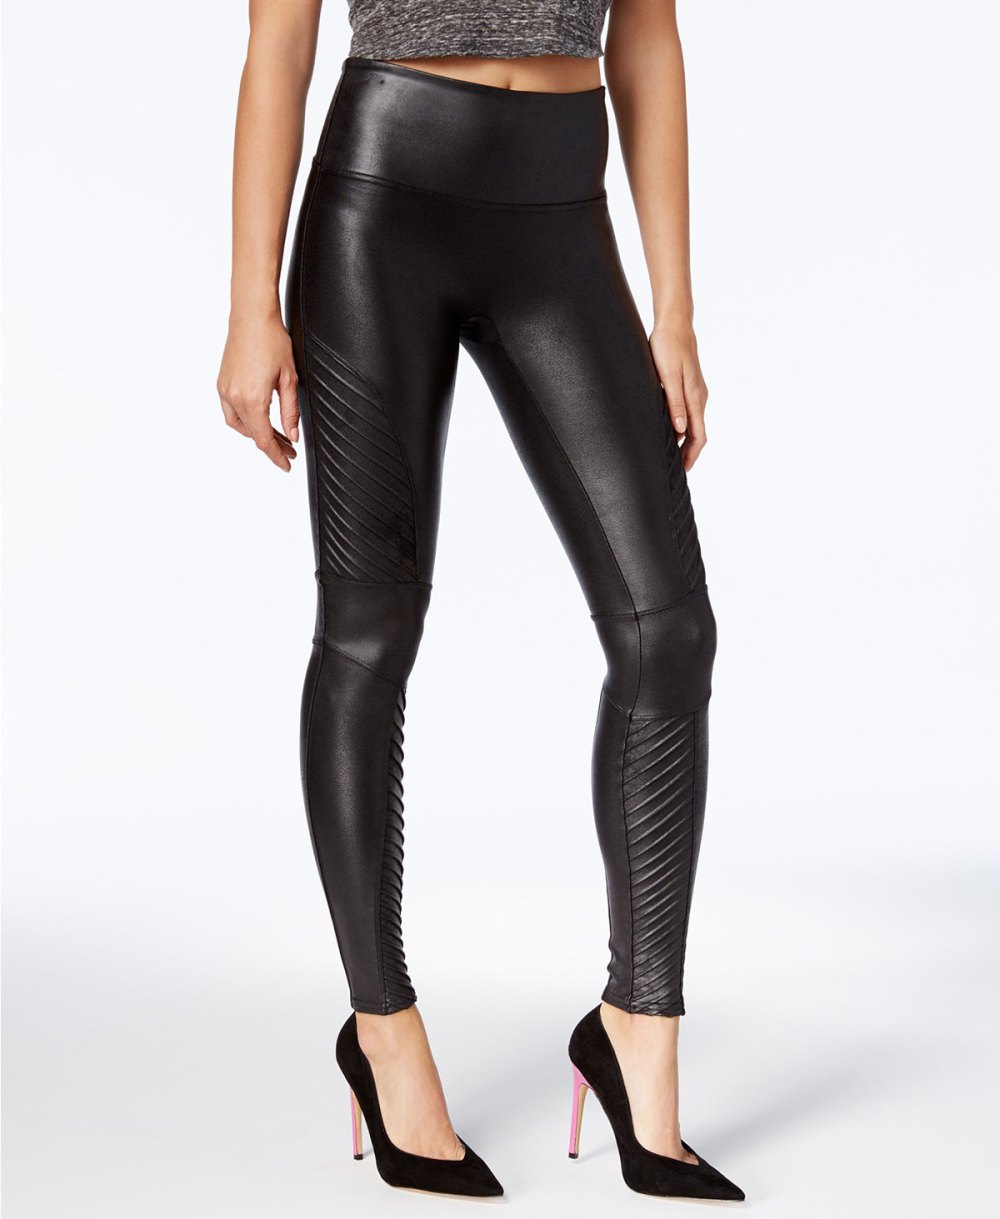 The Best Faux-Leather Black Leggings for All Body Types & Budgets